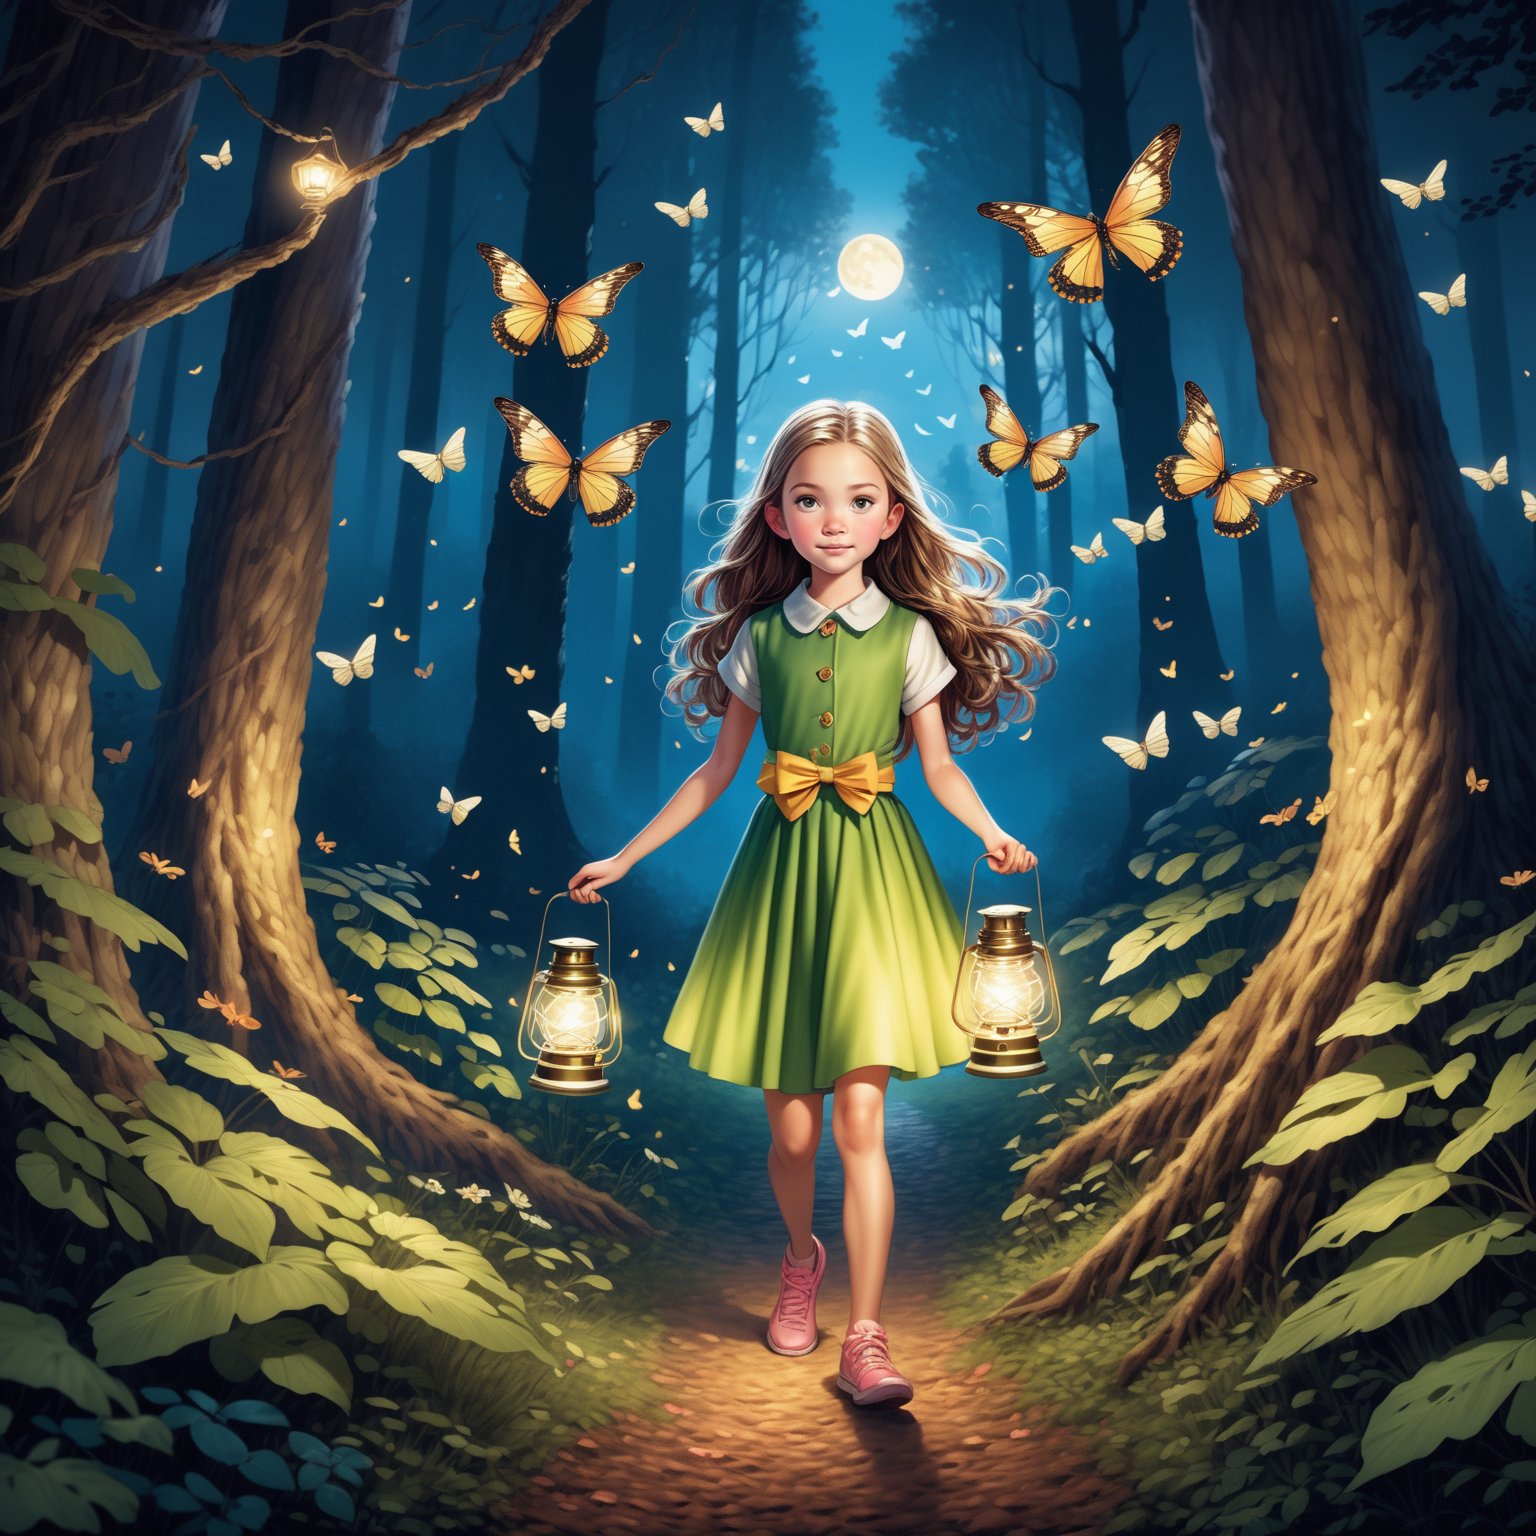 8K image quality, ultra high definition, a girl in the forest carrying a firefly lantern surrounded by glowing butterflies and fireflies. The girl is around 10 years old and wears a skirt with a bow. There are large plantain leaves and elves in the forest, with a size of 1:1